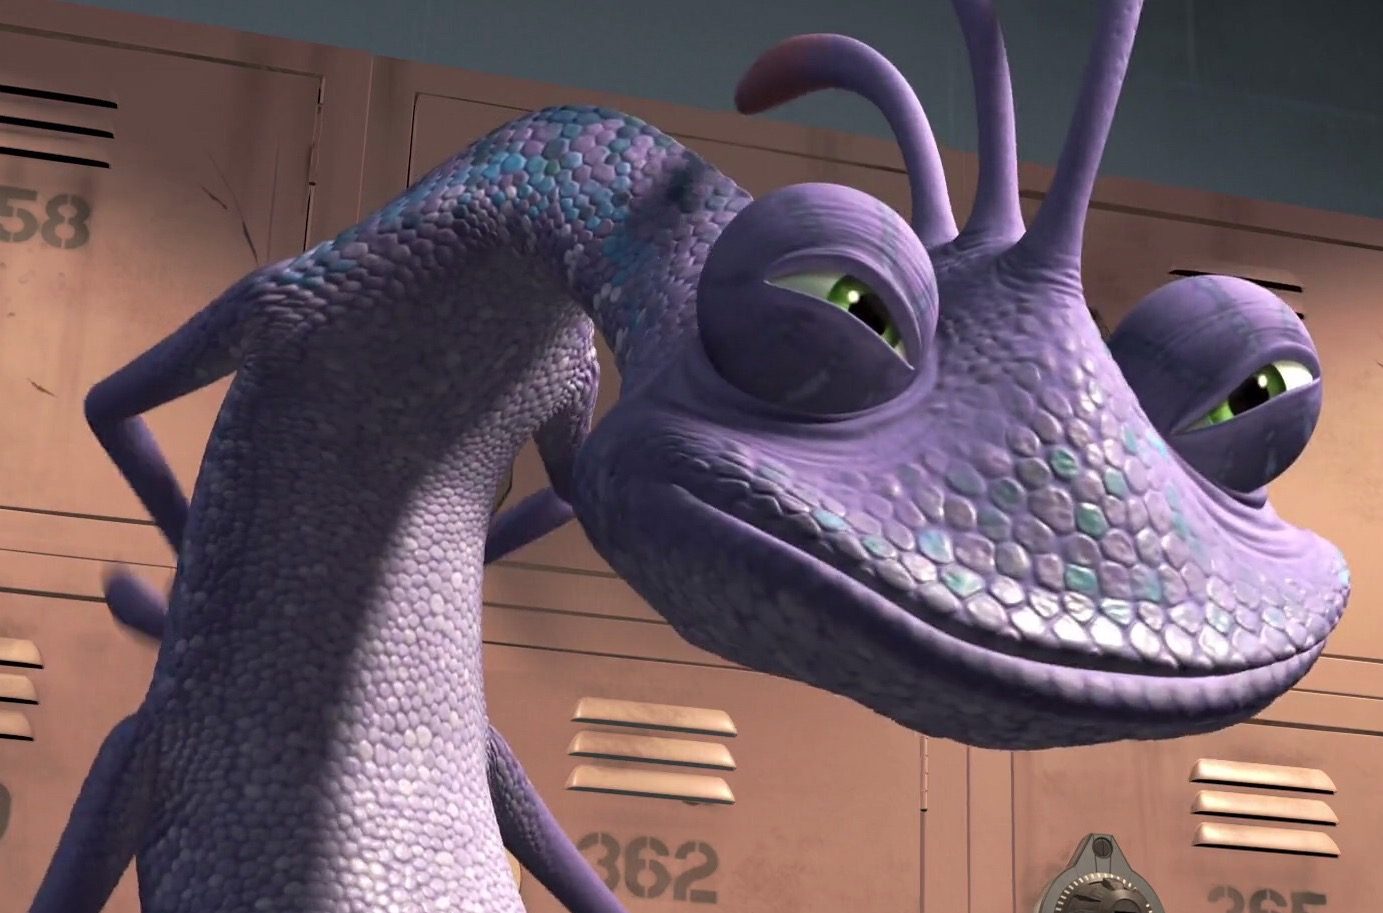 Randall From ‘Monsters Inc’ Is A Slimy Creep & Still Gives Me, An Adult Man, The Heebies